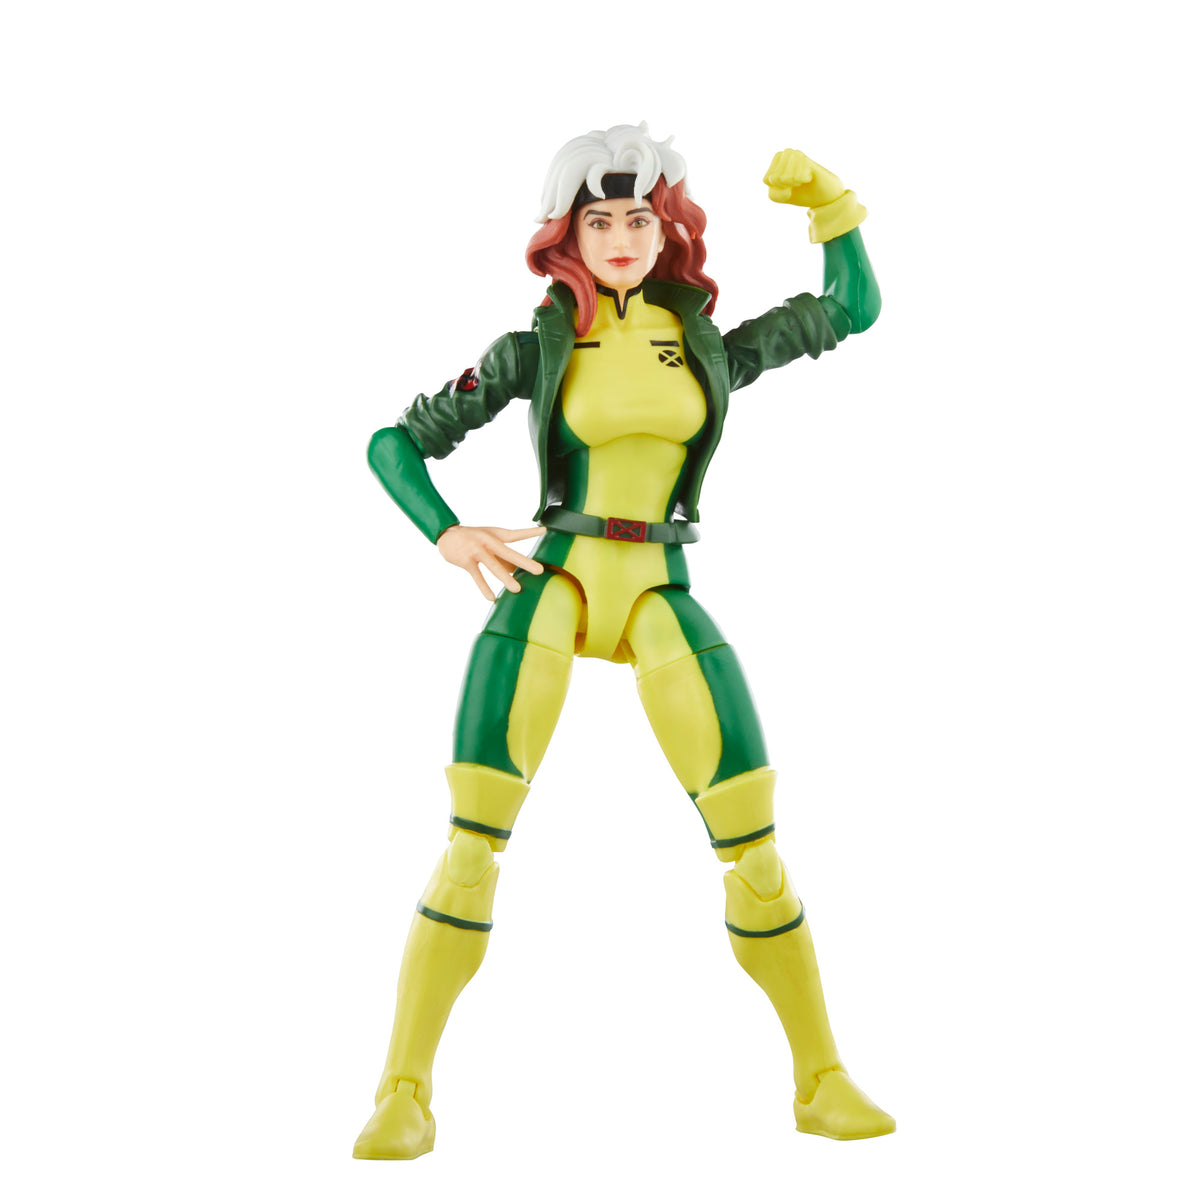 classic marvel figurine collection products for sale